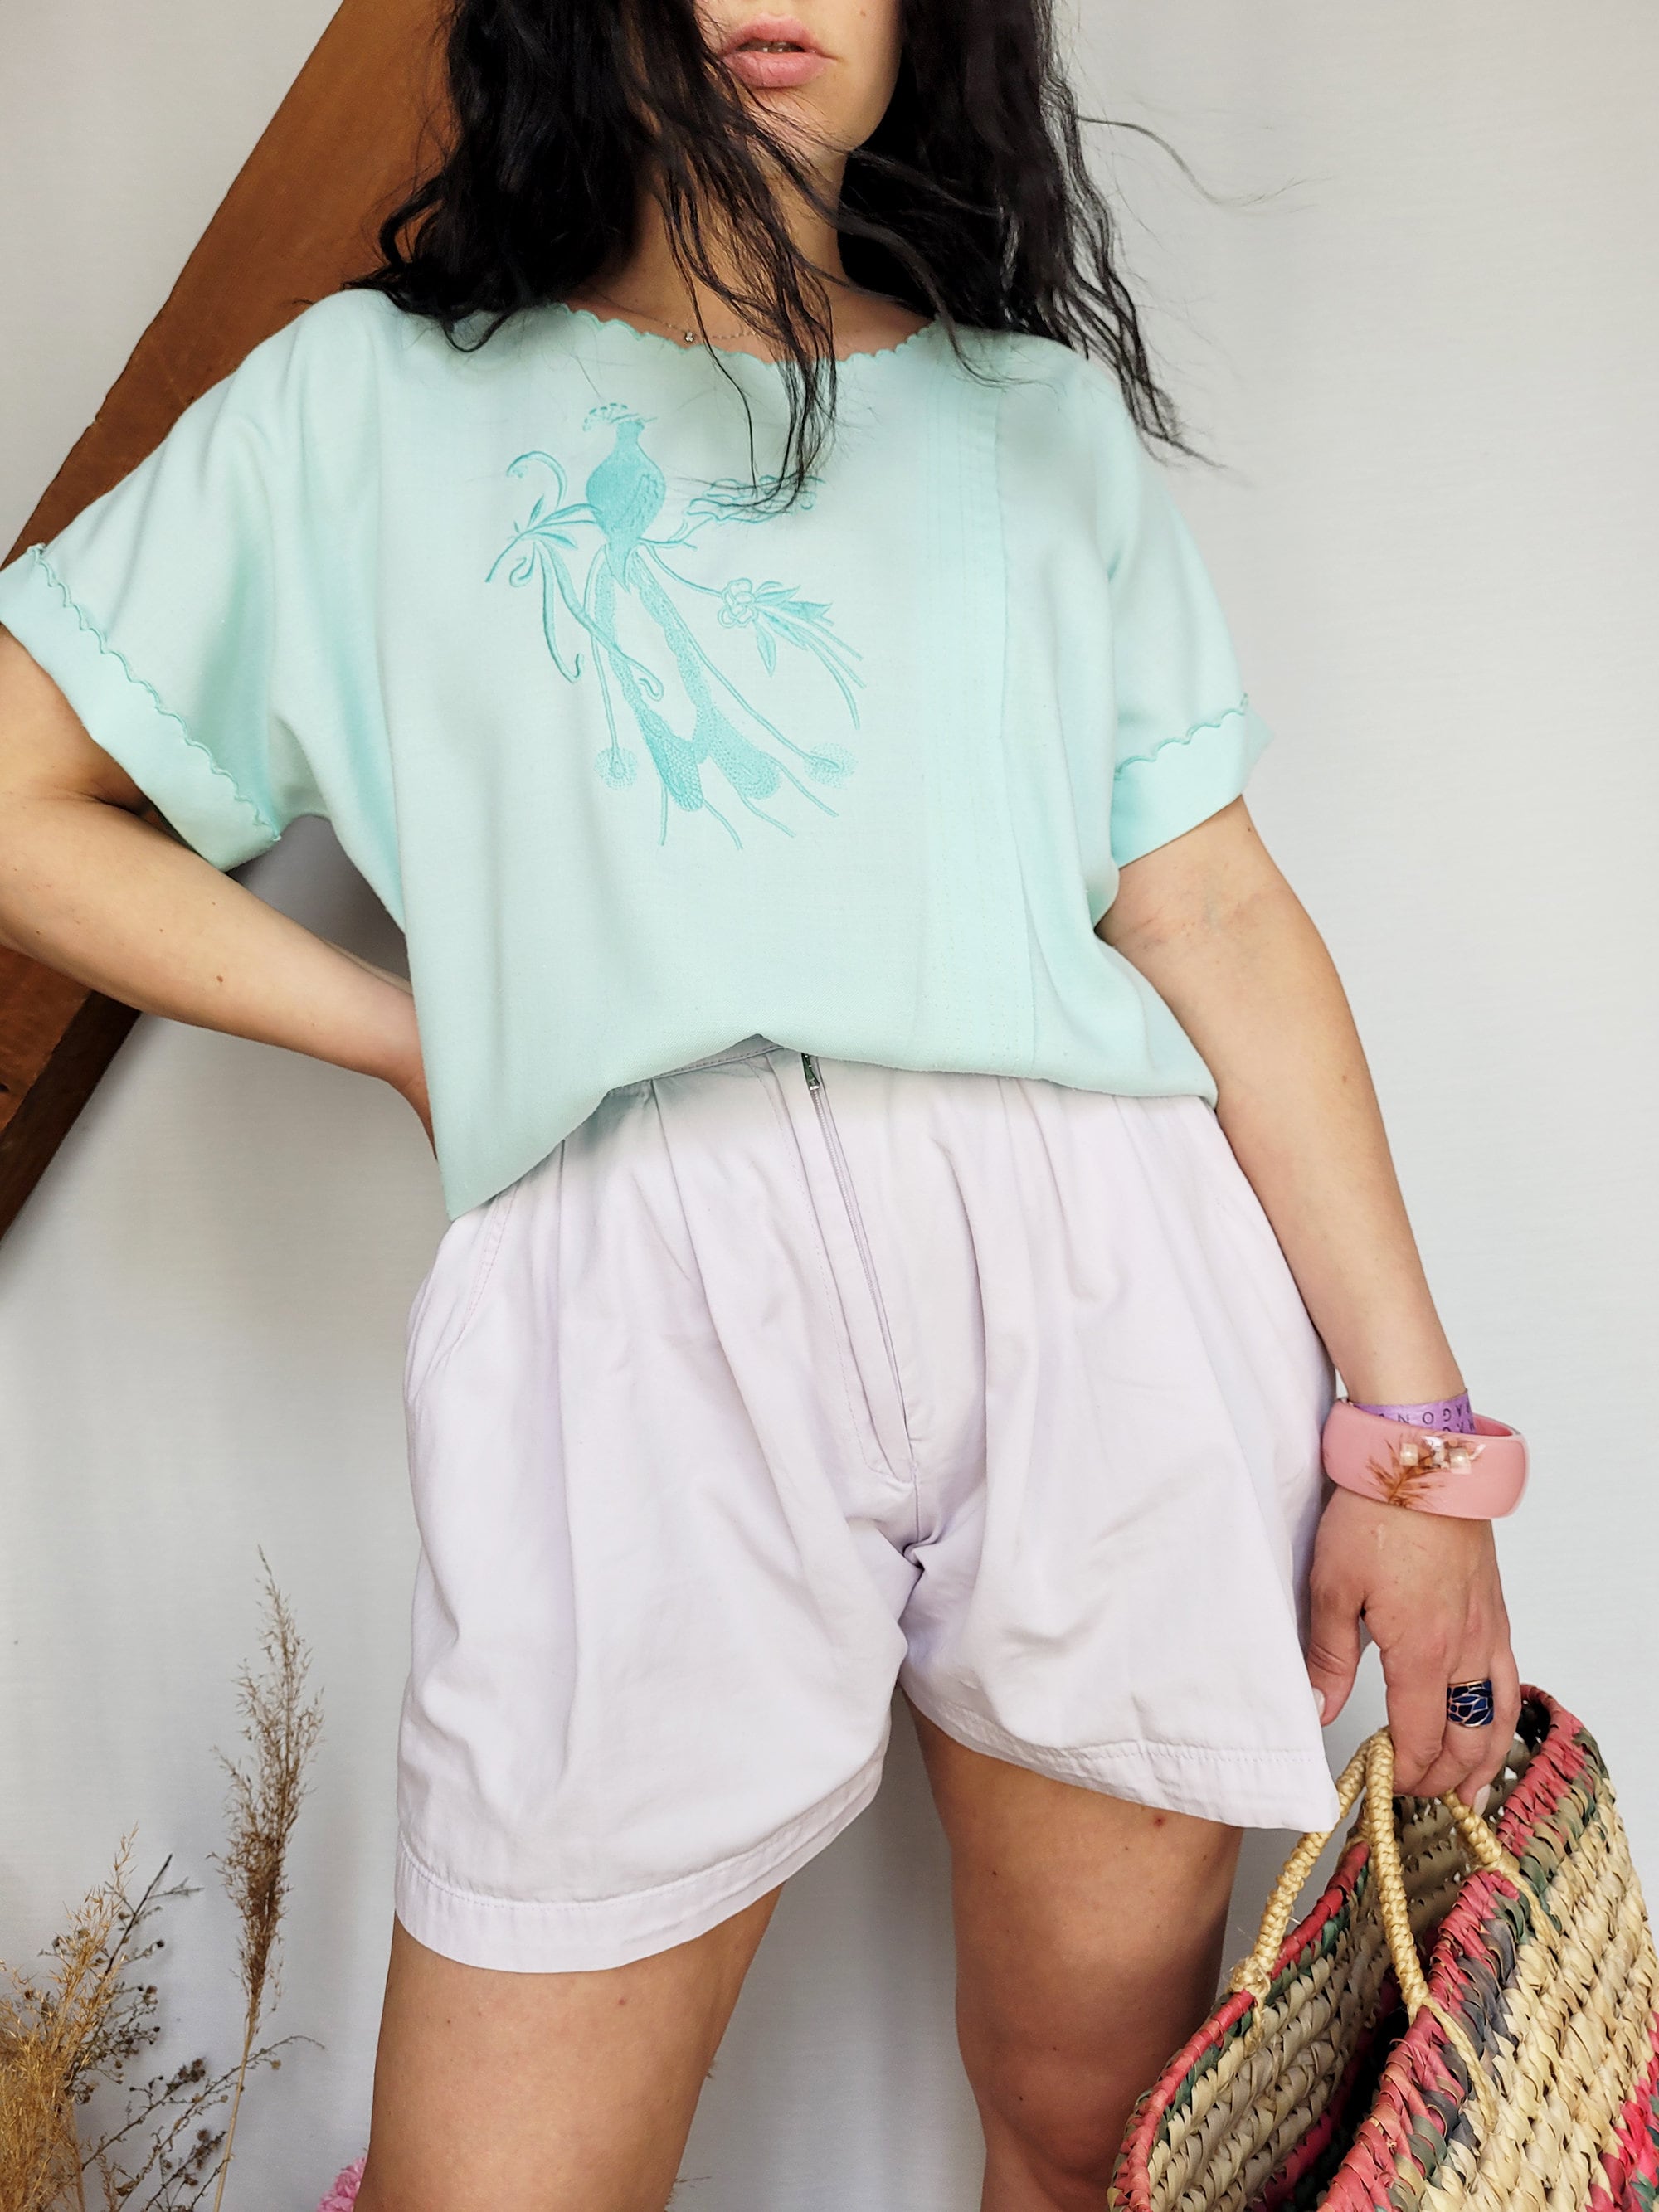 Vintage 80s baby blue embroidered minimalist top blouse